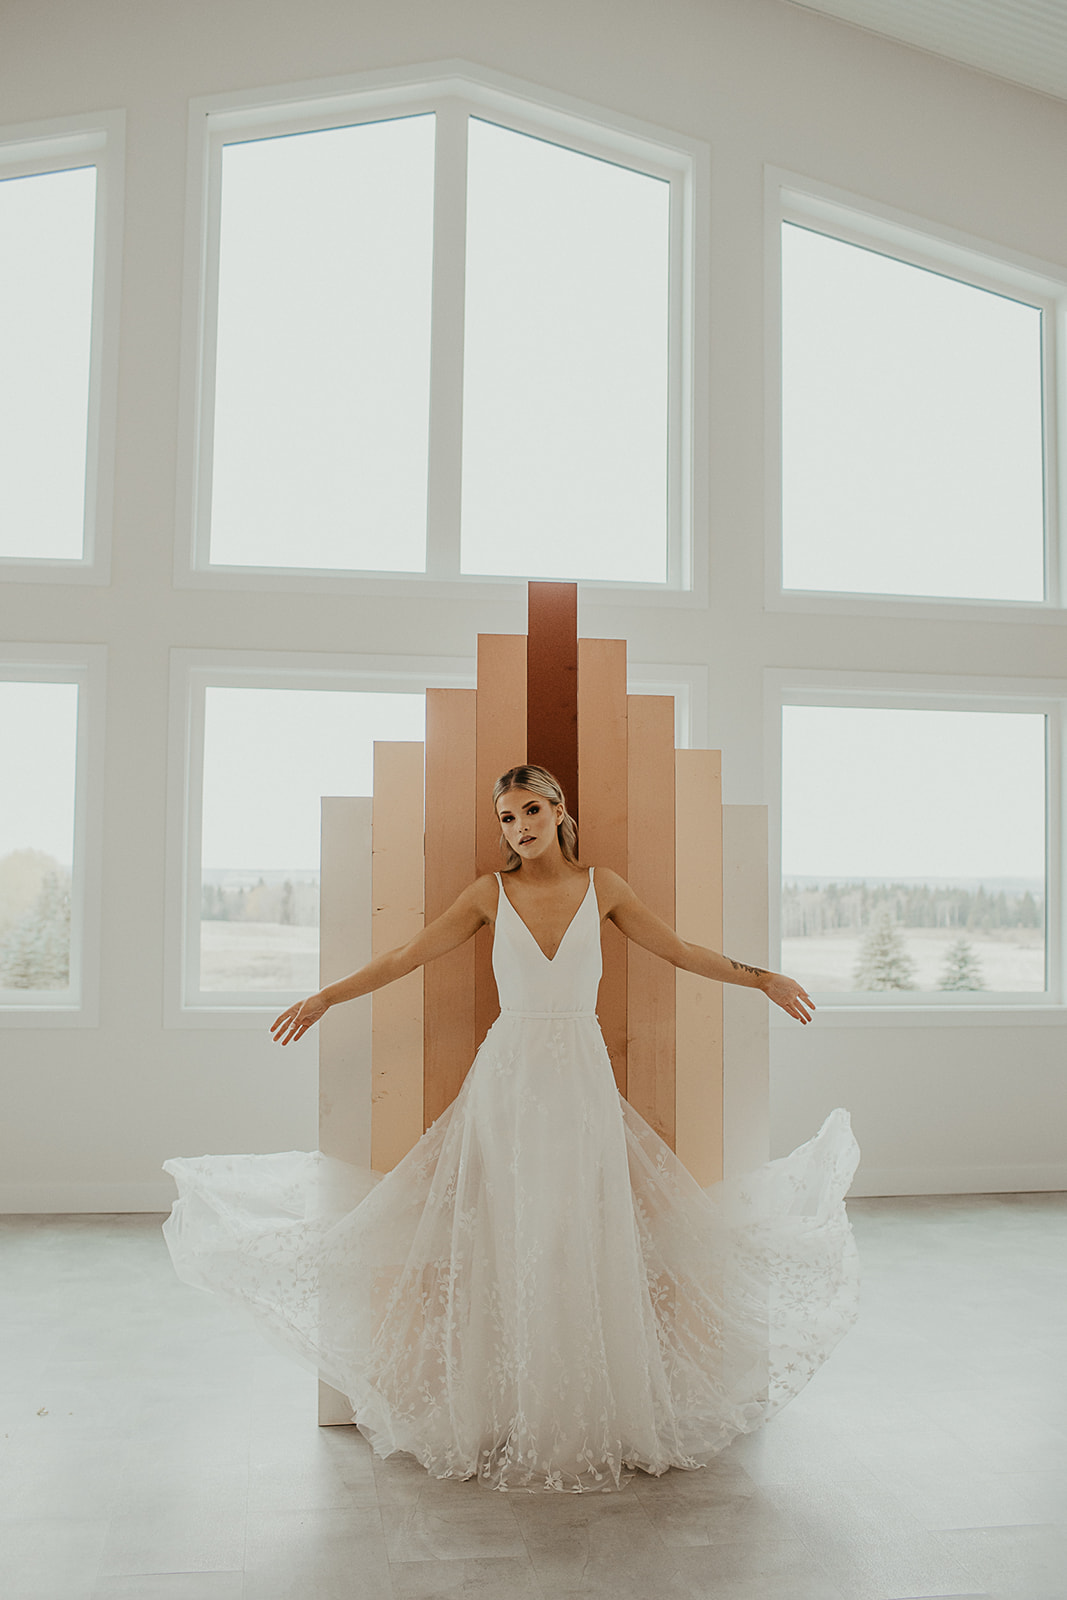 Modern wedding inspiration with unique backdrop, white walls and minimal accents at Tin Roof Event Centre